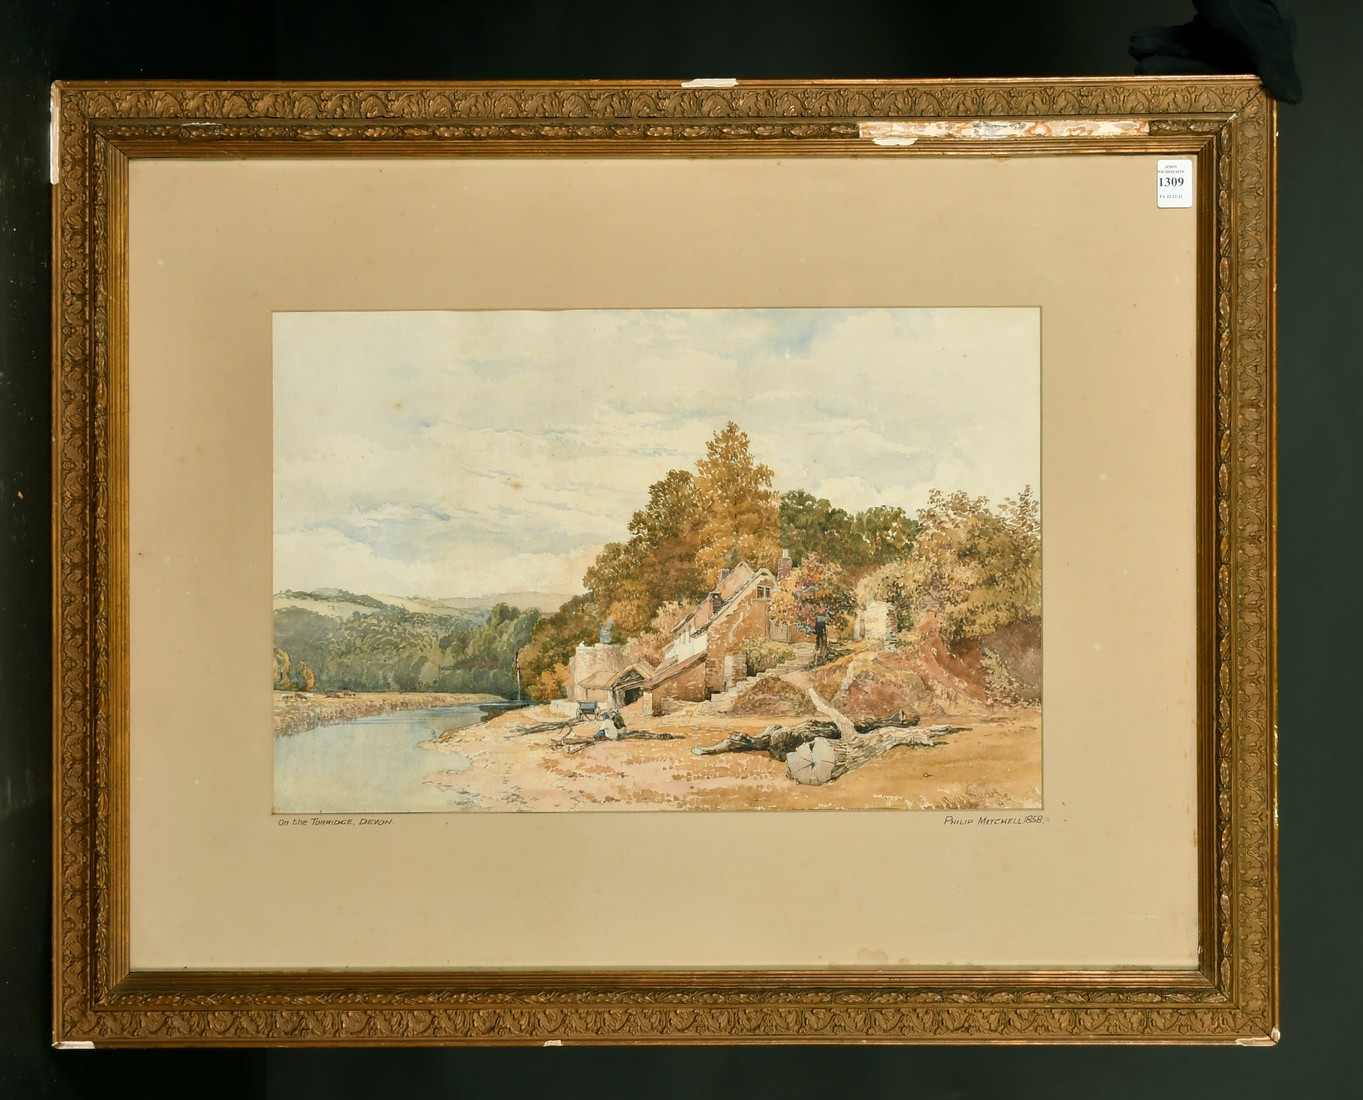 Phillip Mitchell, 'On the Torridge Devon', watercolour, signed, inscribed and dated 1858, 13"x 19. - Image 2 of 4